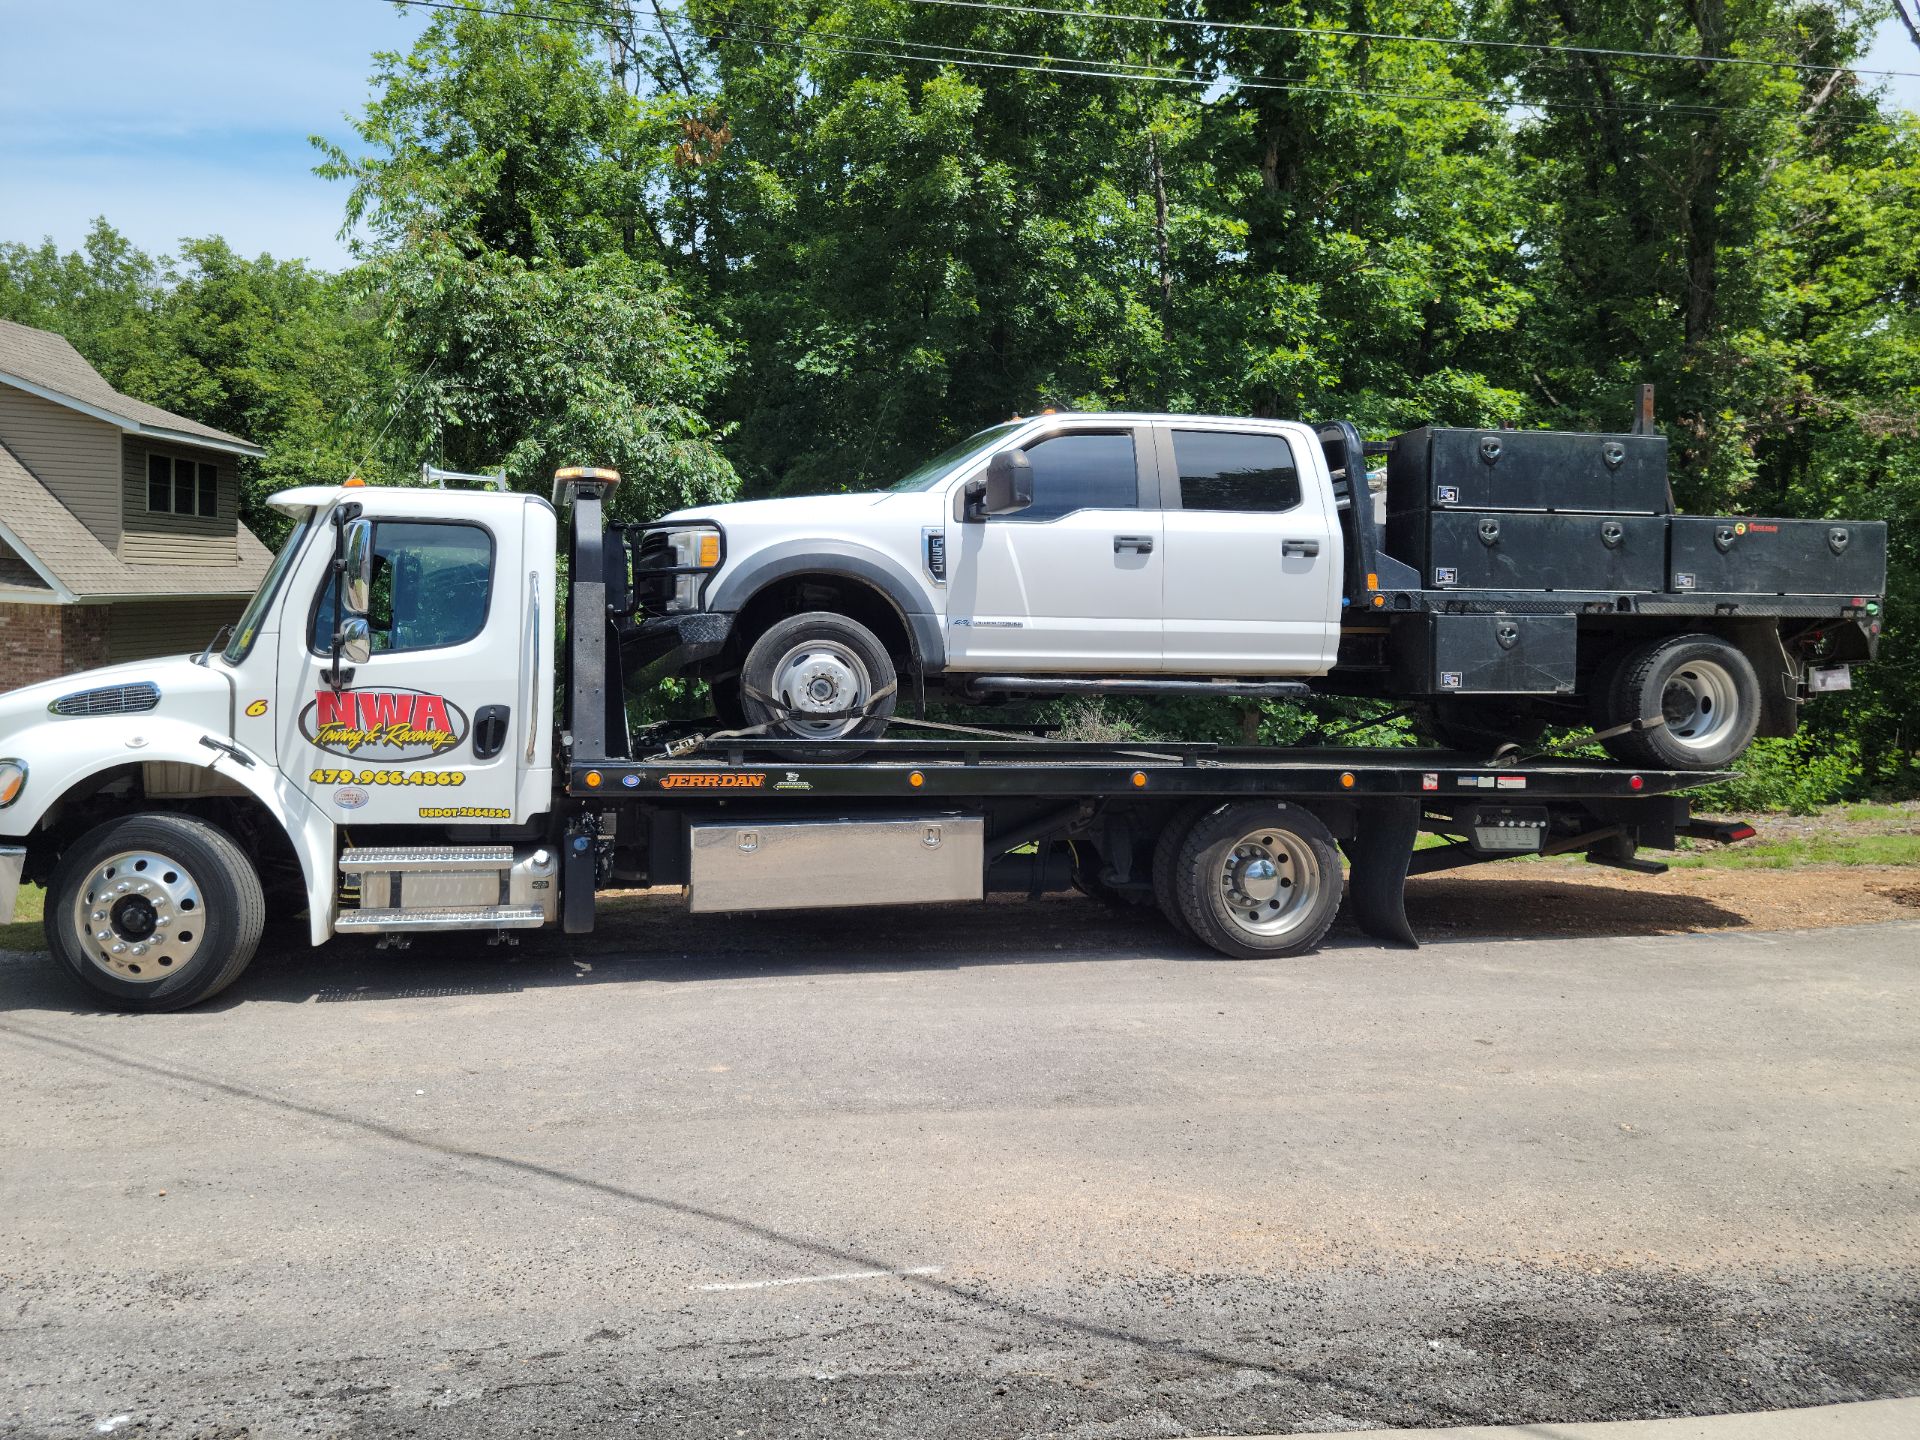 NWA Tow's Roadside Assistance services provide reliable support for unexpected vehicle troubles, delivering 24/7 peace of mind on the roads of Northwest Arkansas.